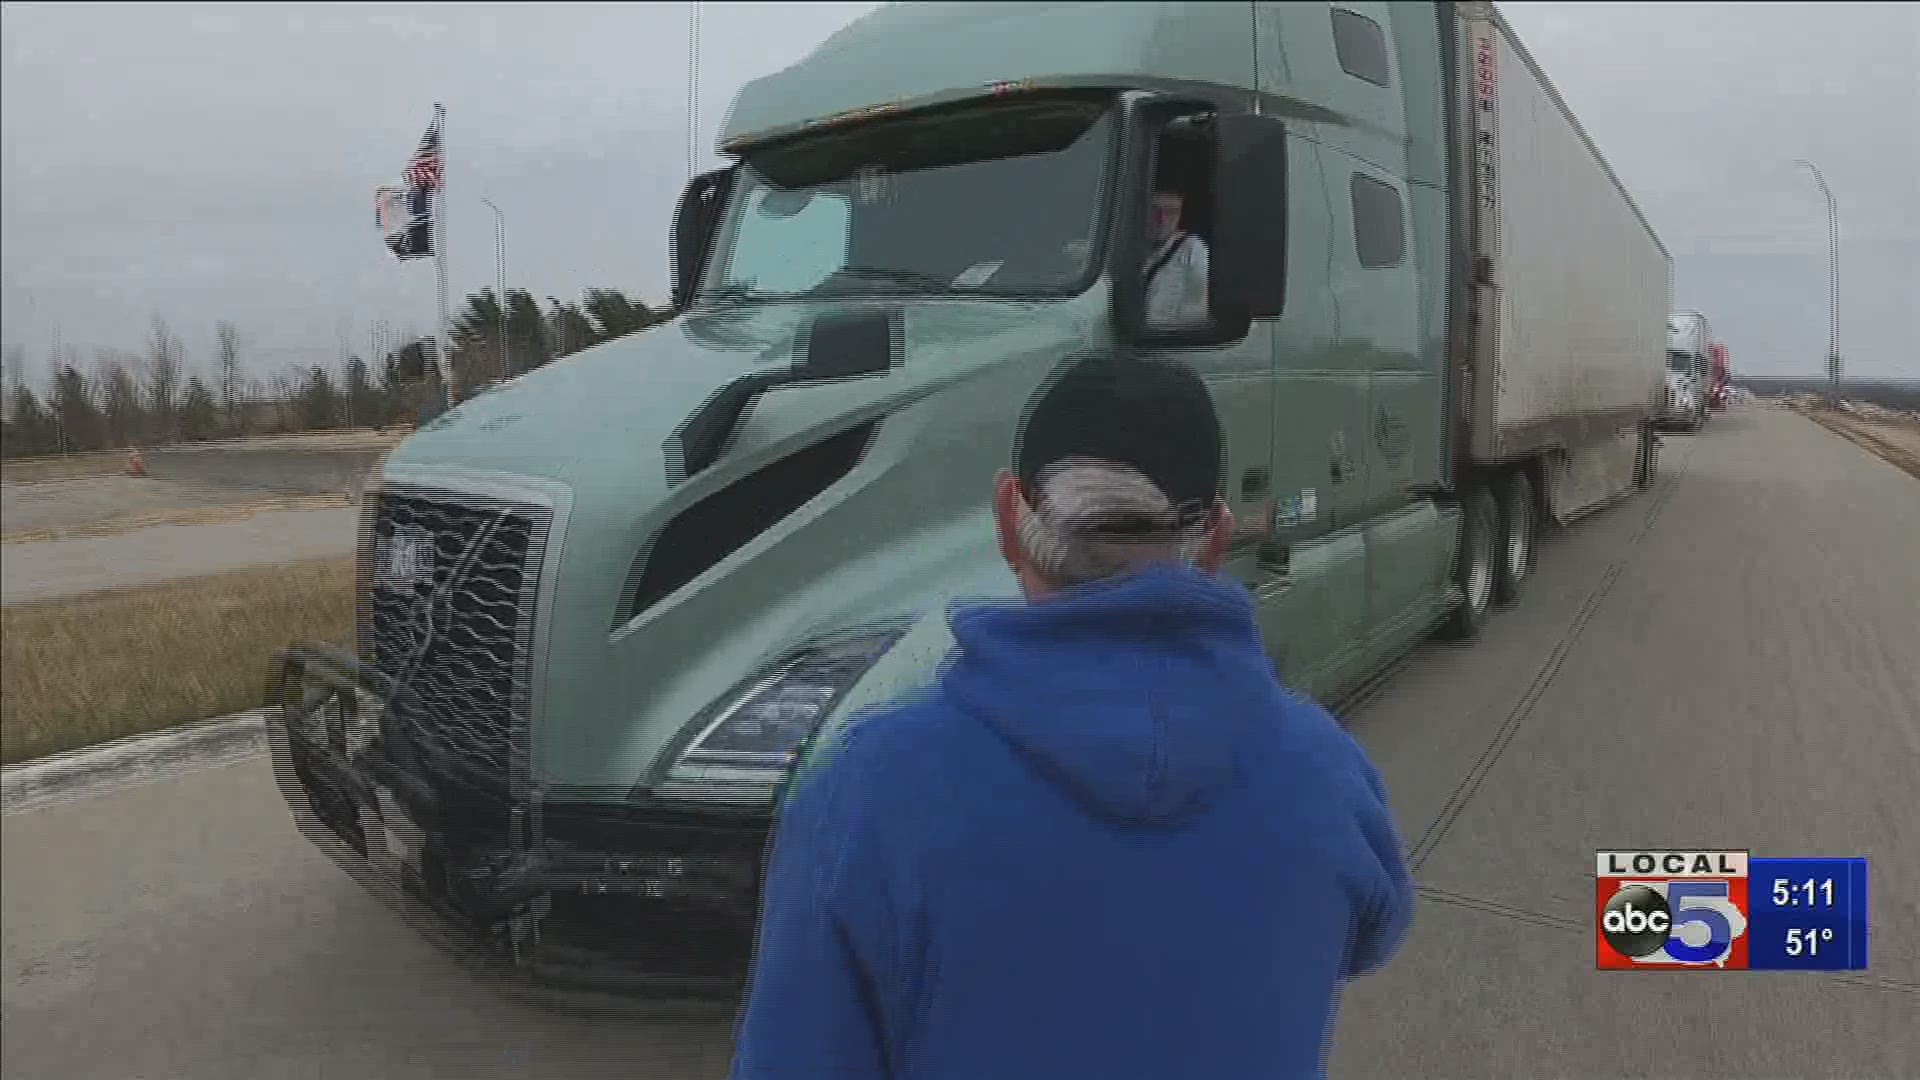 The Iowa Motor Truck Association is working to give 1,000 complimentary boxed lunches to truck drivers.